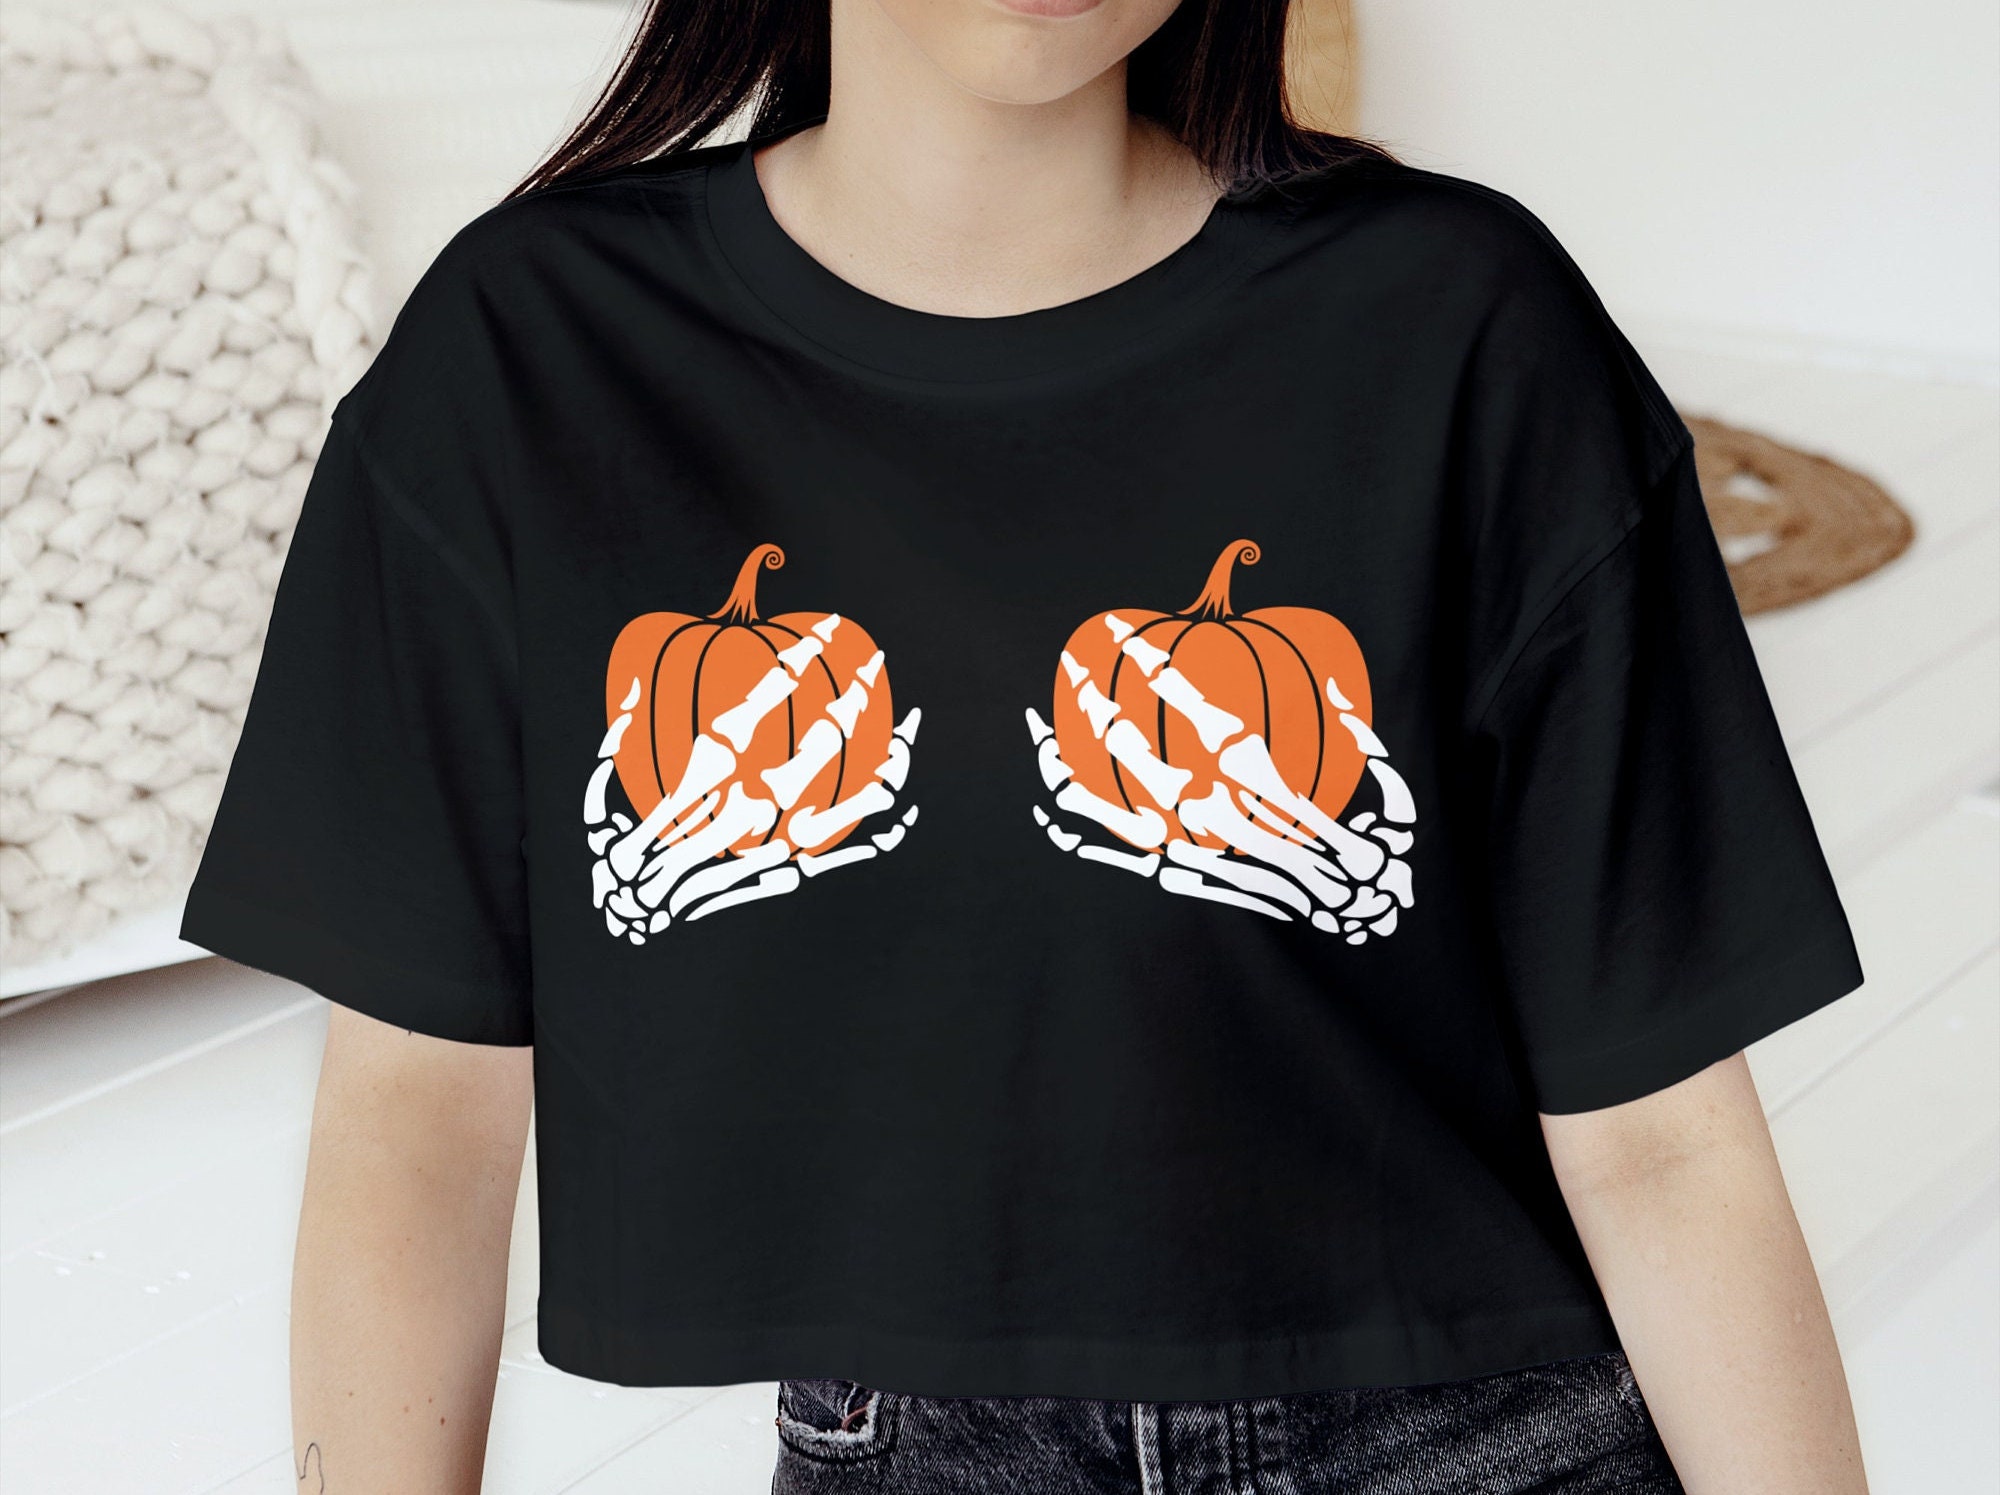 Discover Champion Women's Heritage Cropped T-Shirt skeleton hands t-shirts halloween crop top black halloween shirts pumpkin crop tee black crop top